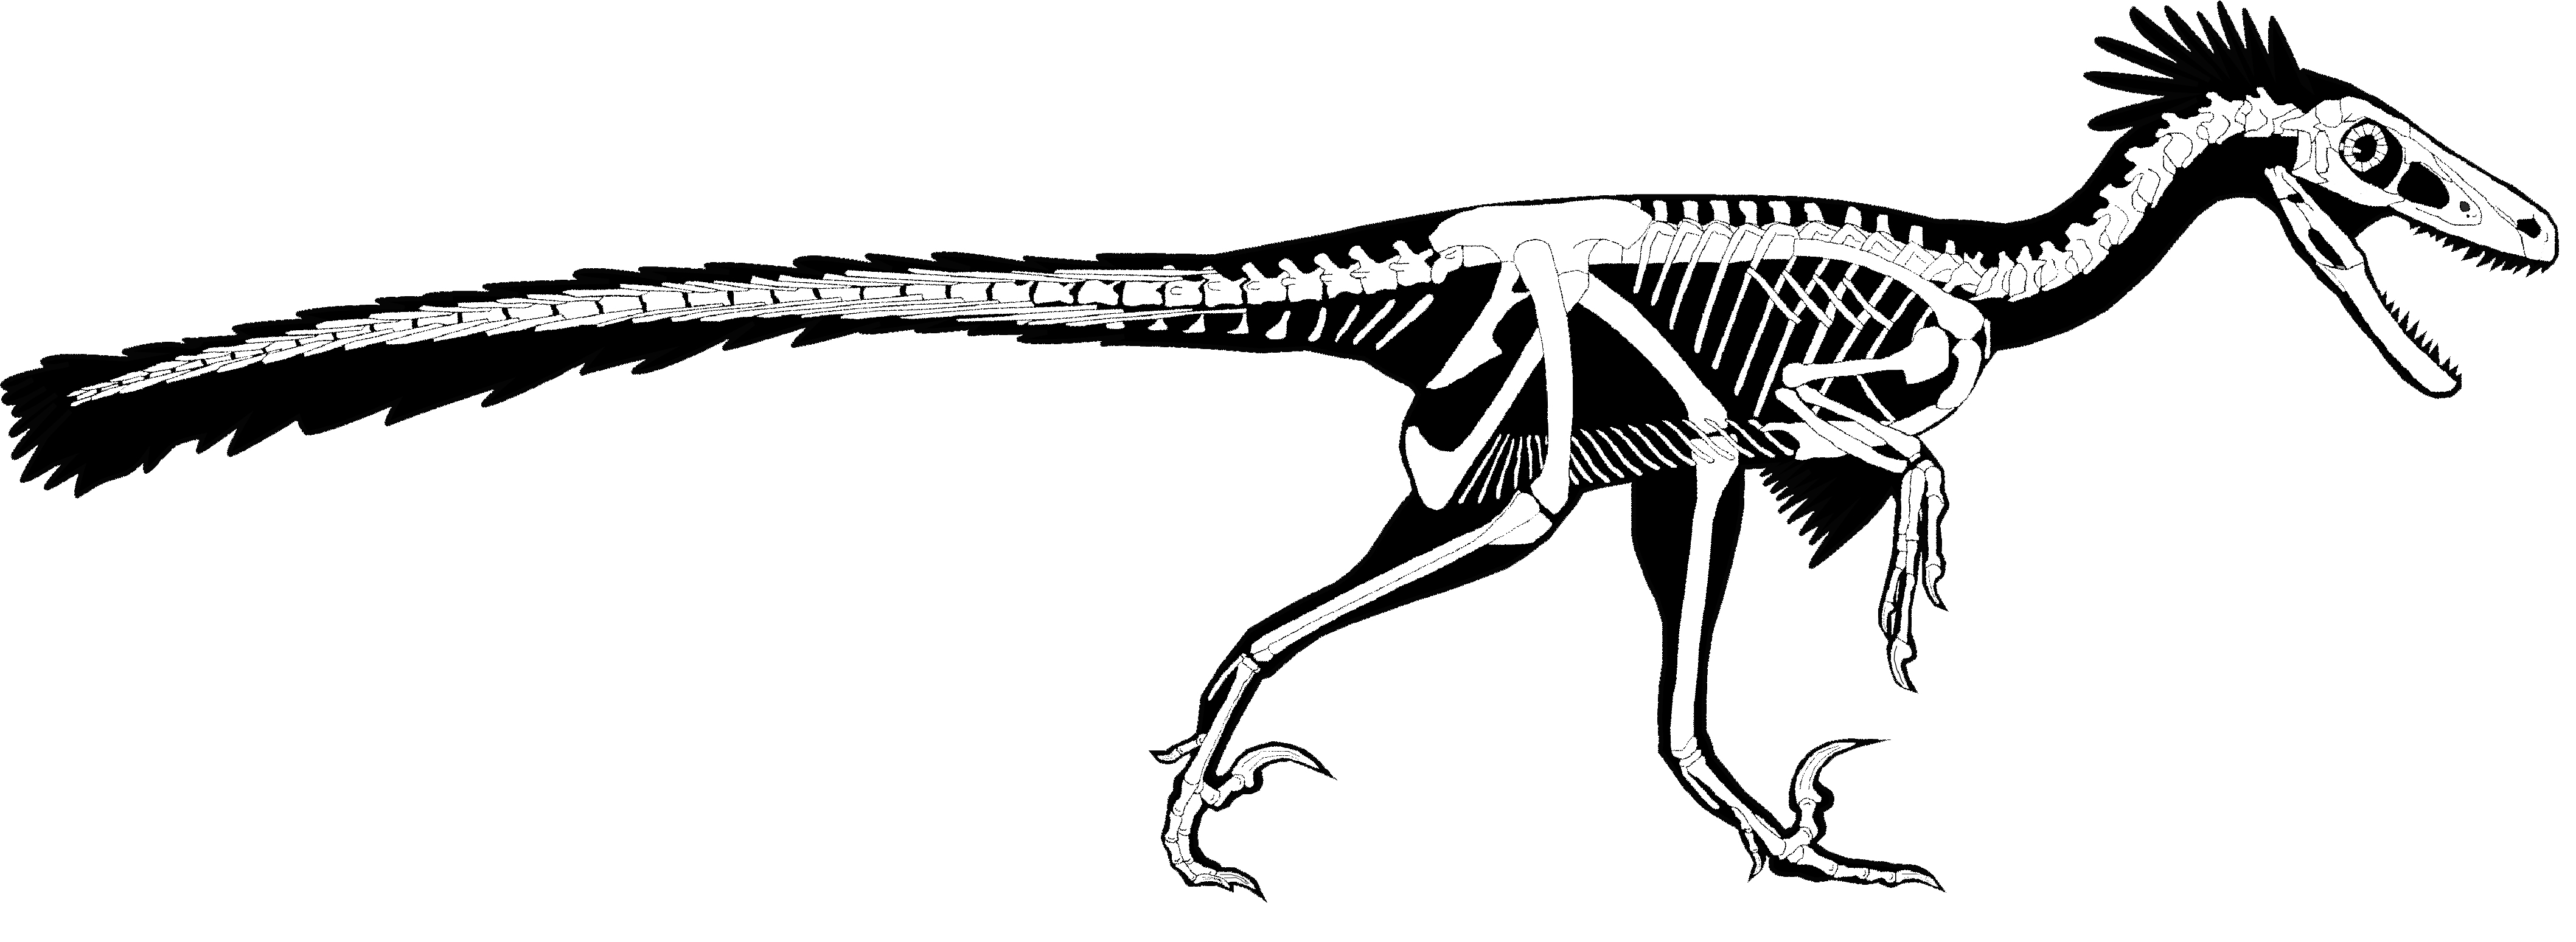 silhouette and outline of a bipedal dinosaur